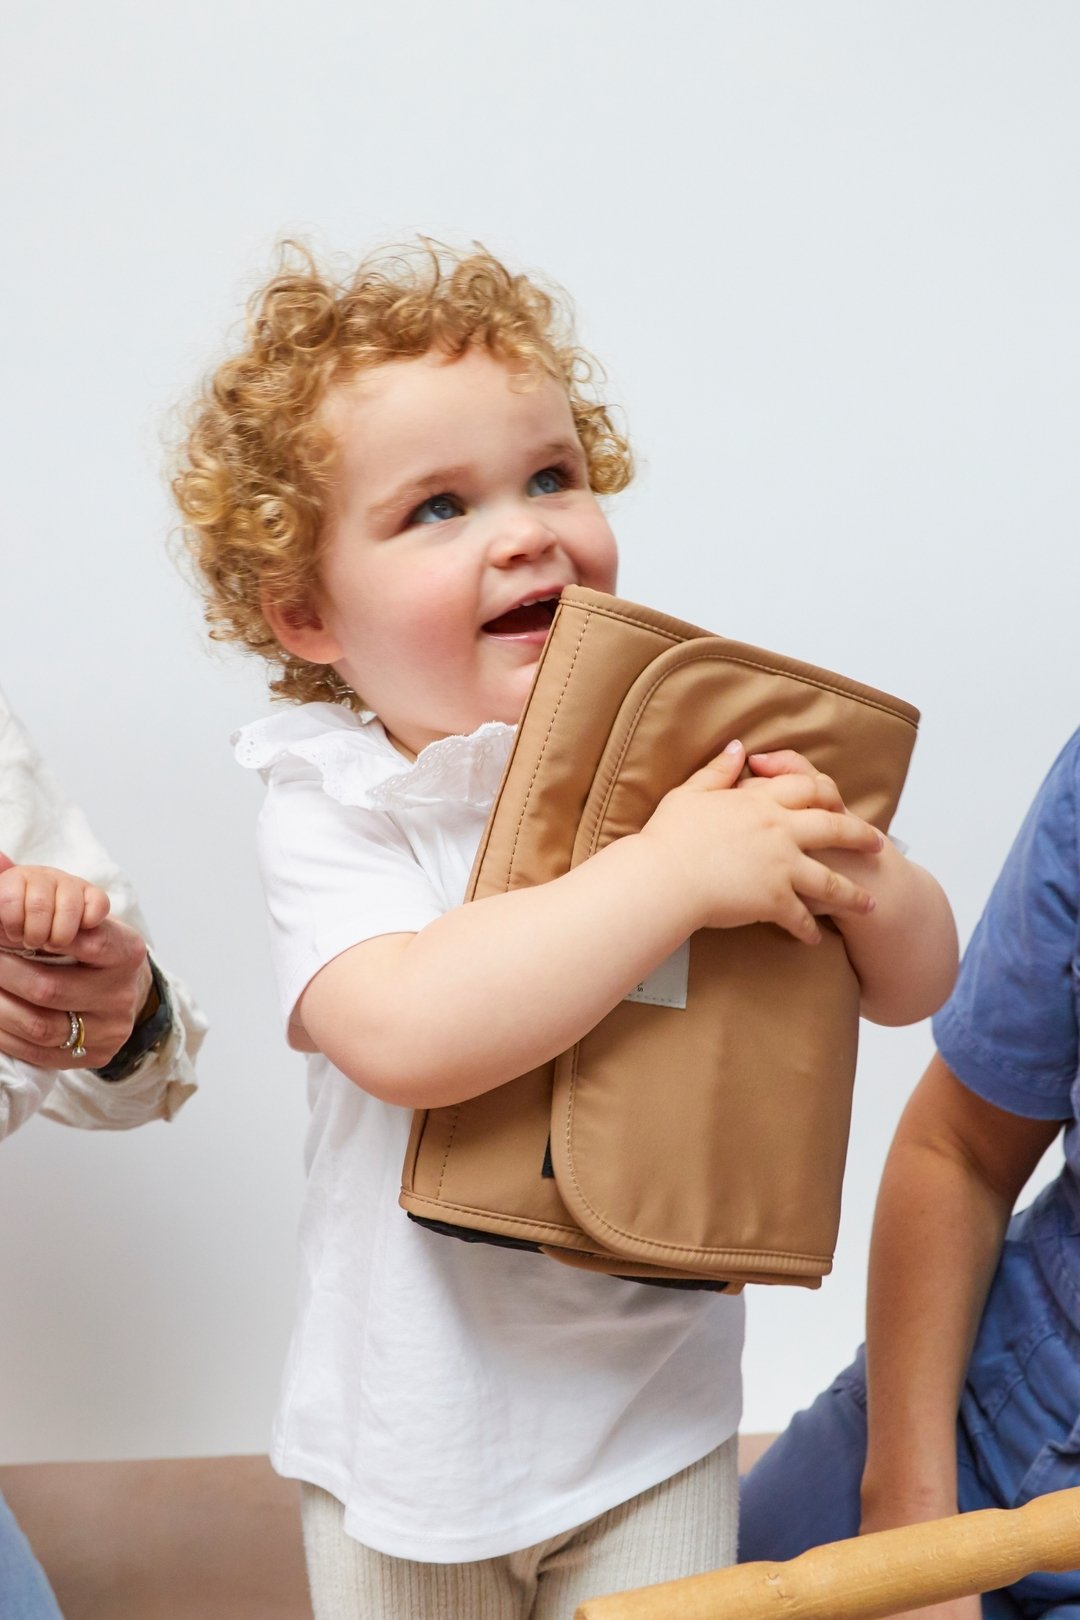 You're out and about with your little bundle of joy, and suddenly it's time for a diaper change. No need to panic, MAGGIE is the perfect changing mat to have on-the-go!

Designed by mums for other mums (and dads), it includes two handy pockets for na